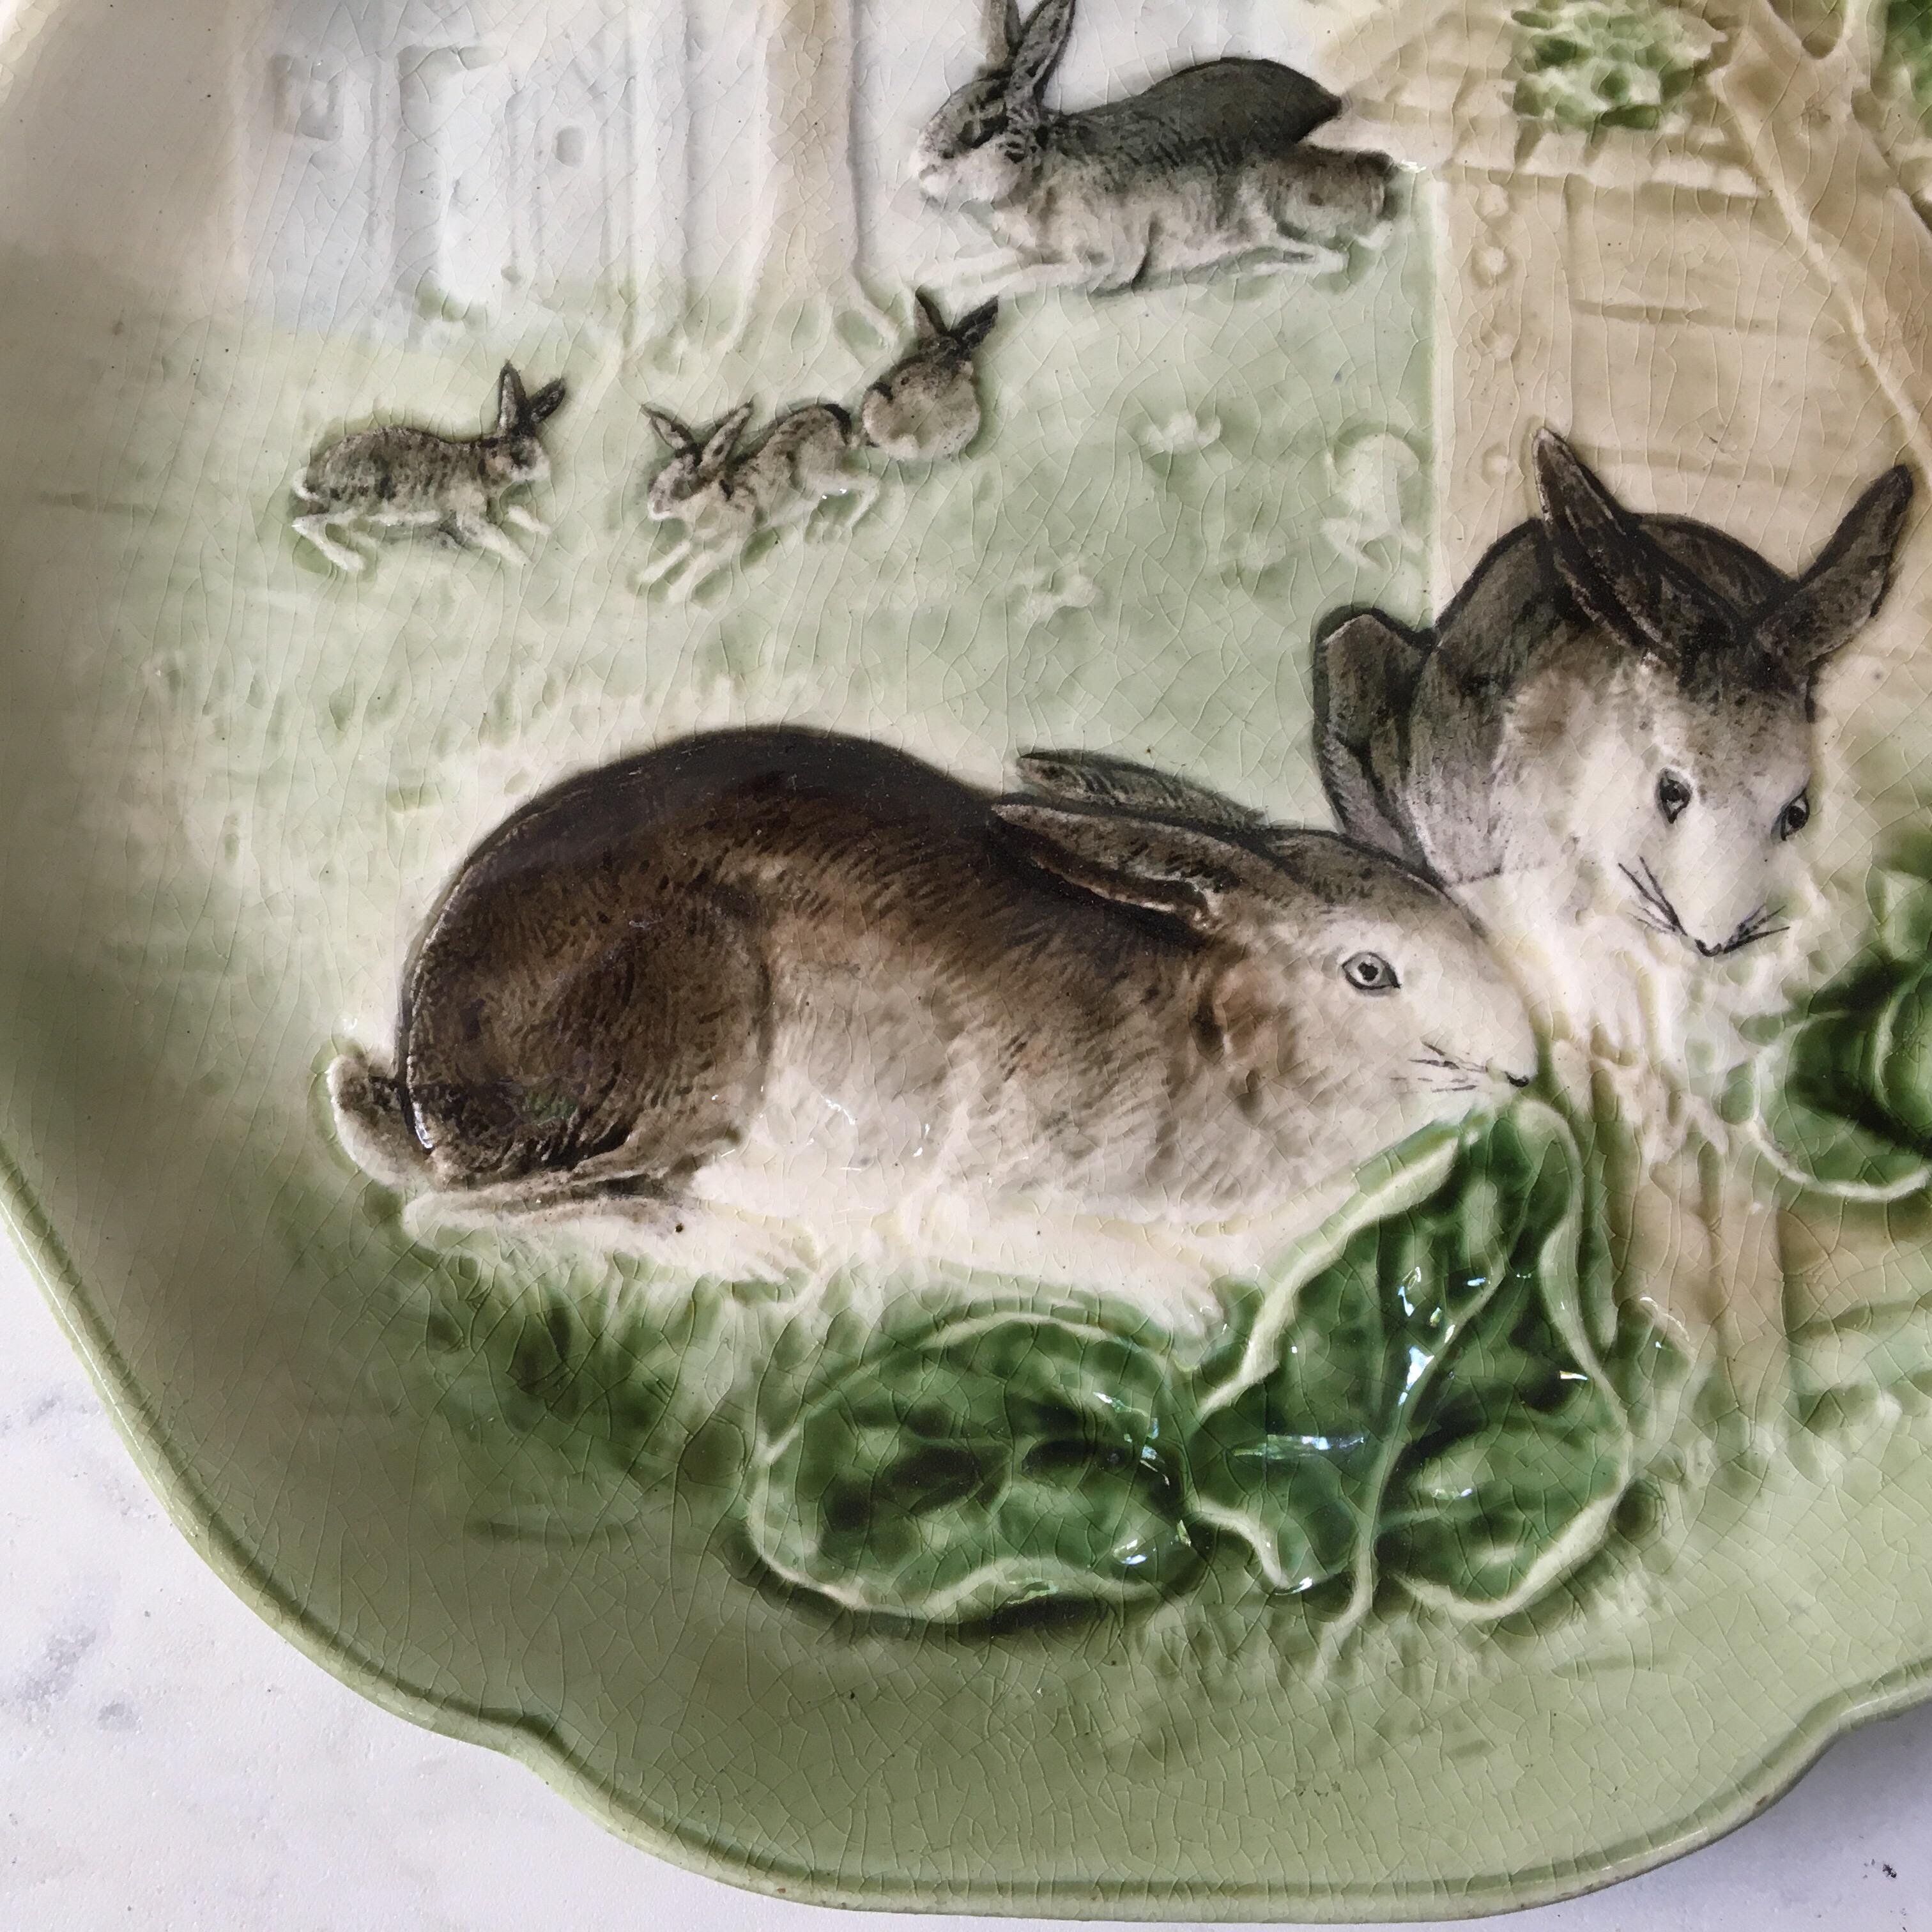 Lovely and charming French Majolica plate with rabbits family eaten cabbage signed Choisy le Roi, circa 1880 (Plates made for Higgins and Seiter
New York).